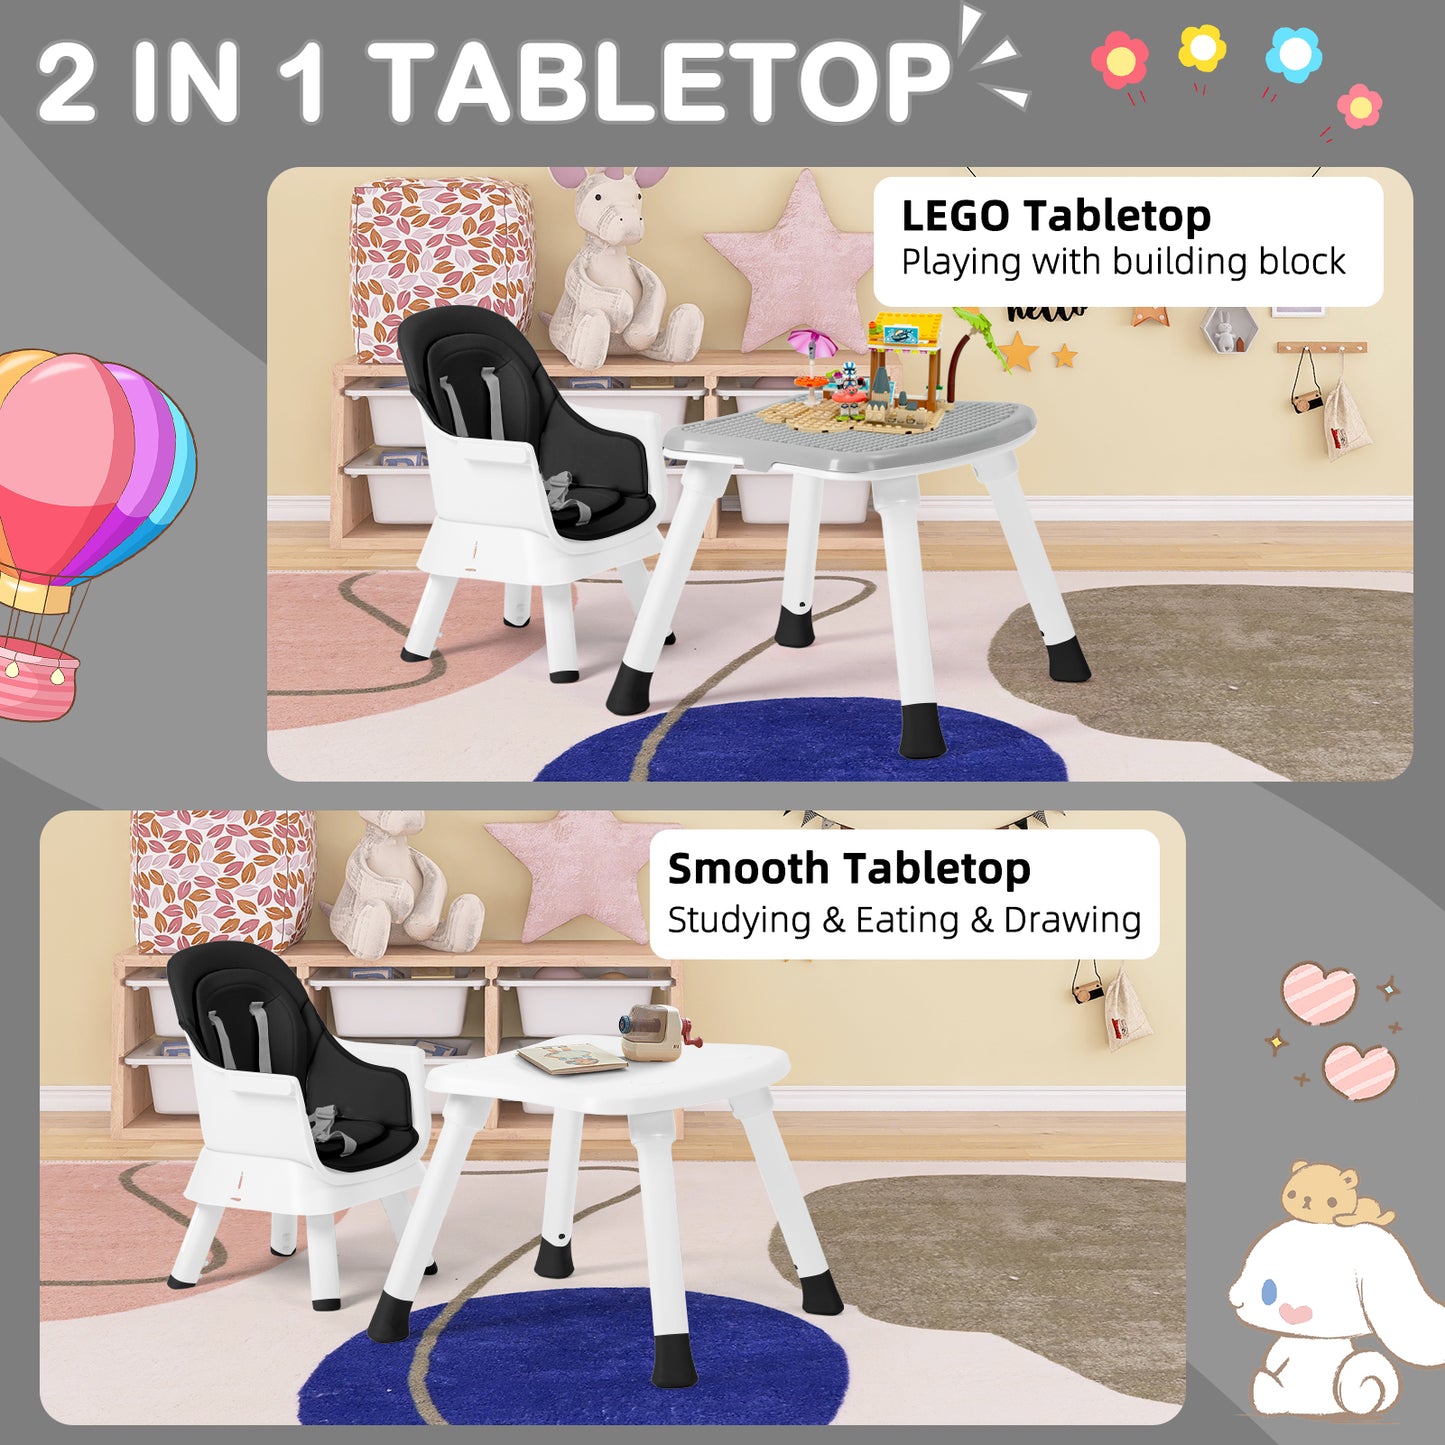 8 in 1 Baby High Chair, Toddler Dining Booster Seat for Eating, White